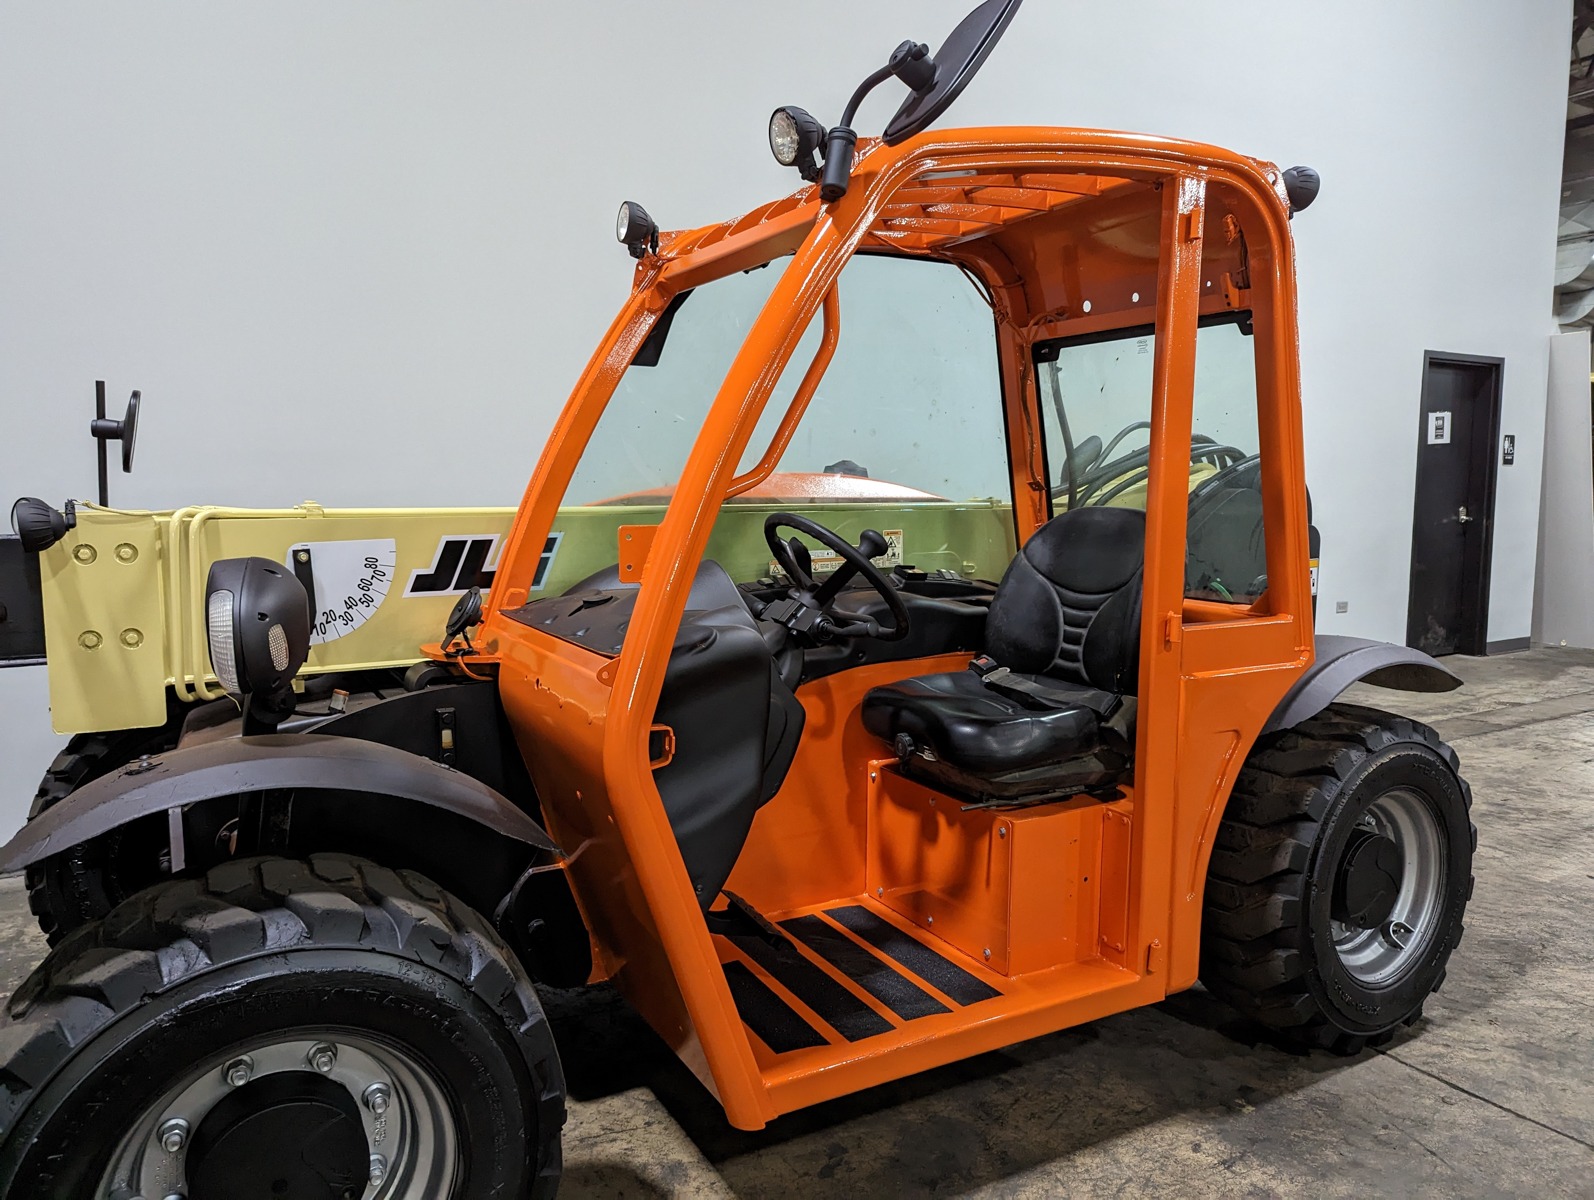 Used 2014 JLG G5-18A  | Cary, IL